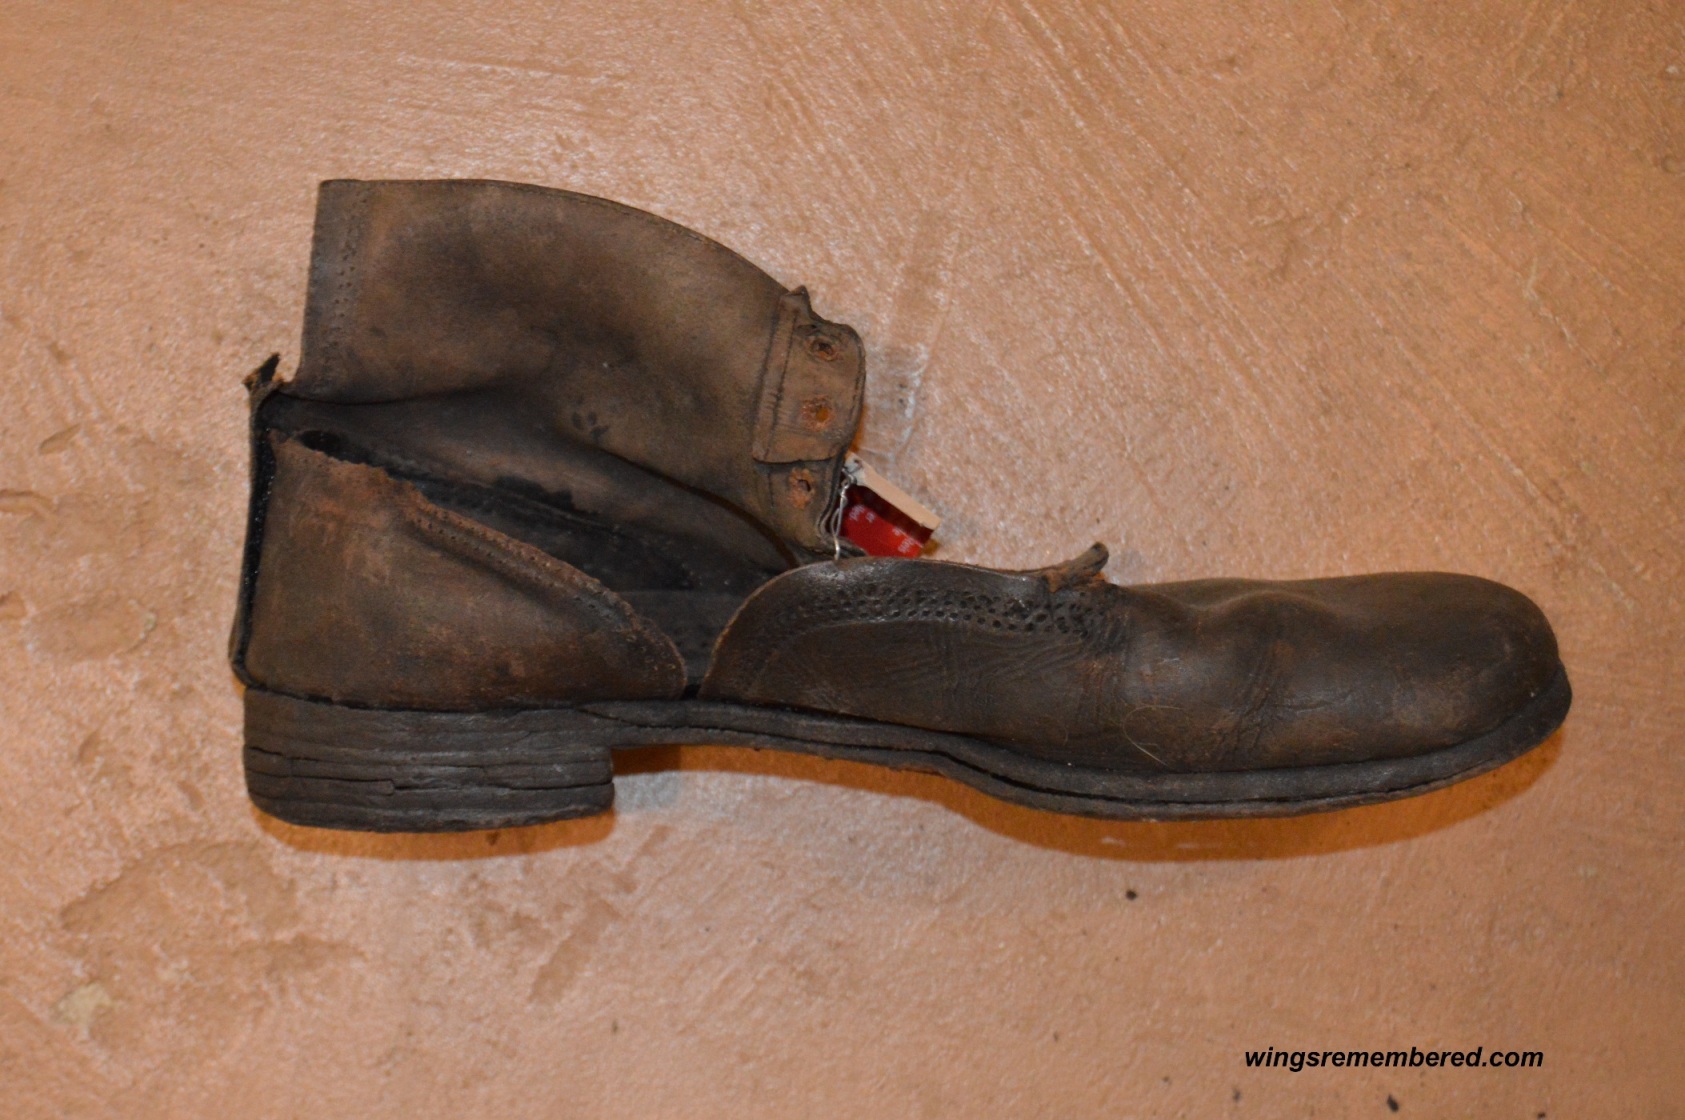 William’s shoe remains as recovered from the crash site